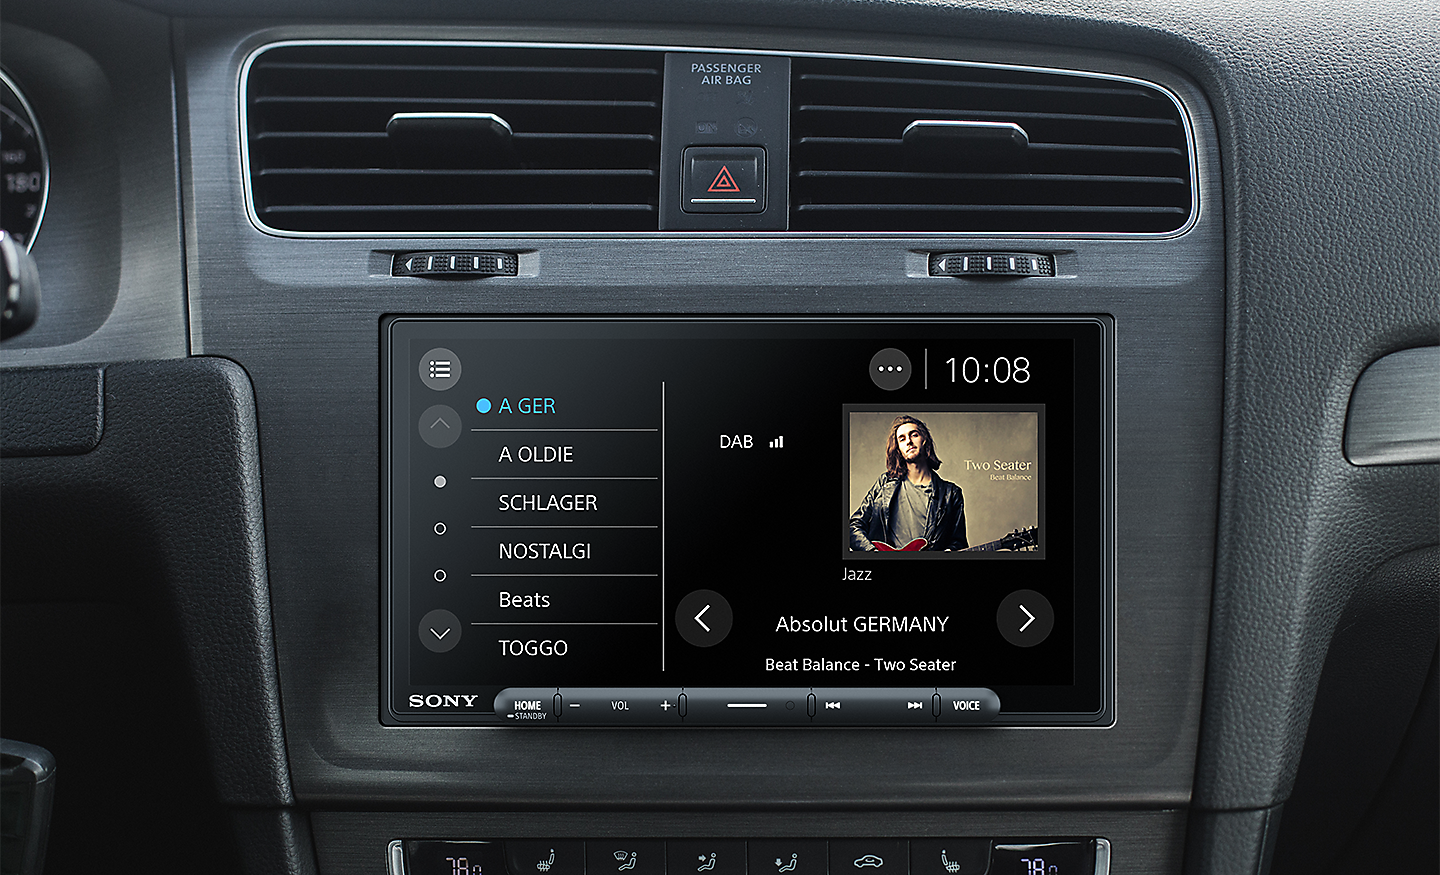 Image of the XAV-AX6050 in a dashboard with DAB radio interface on-screen